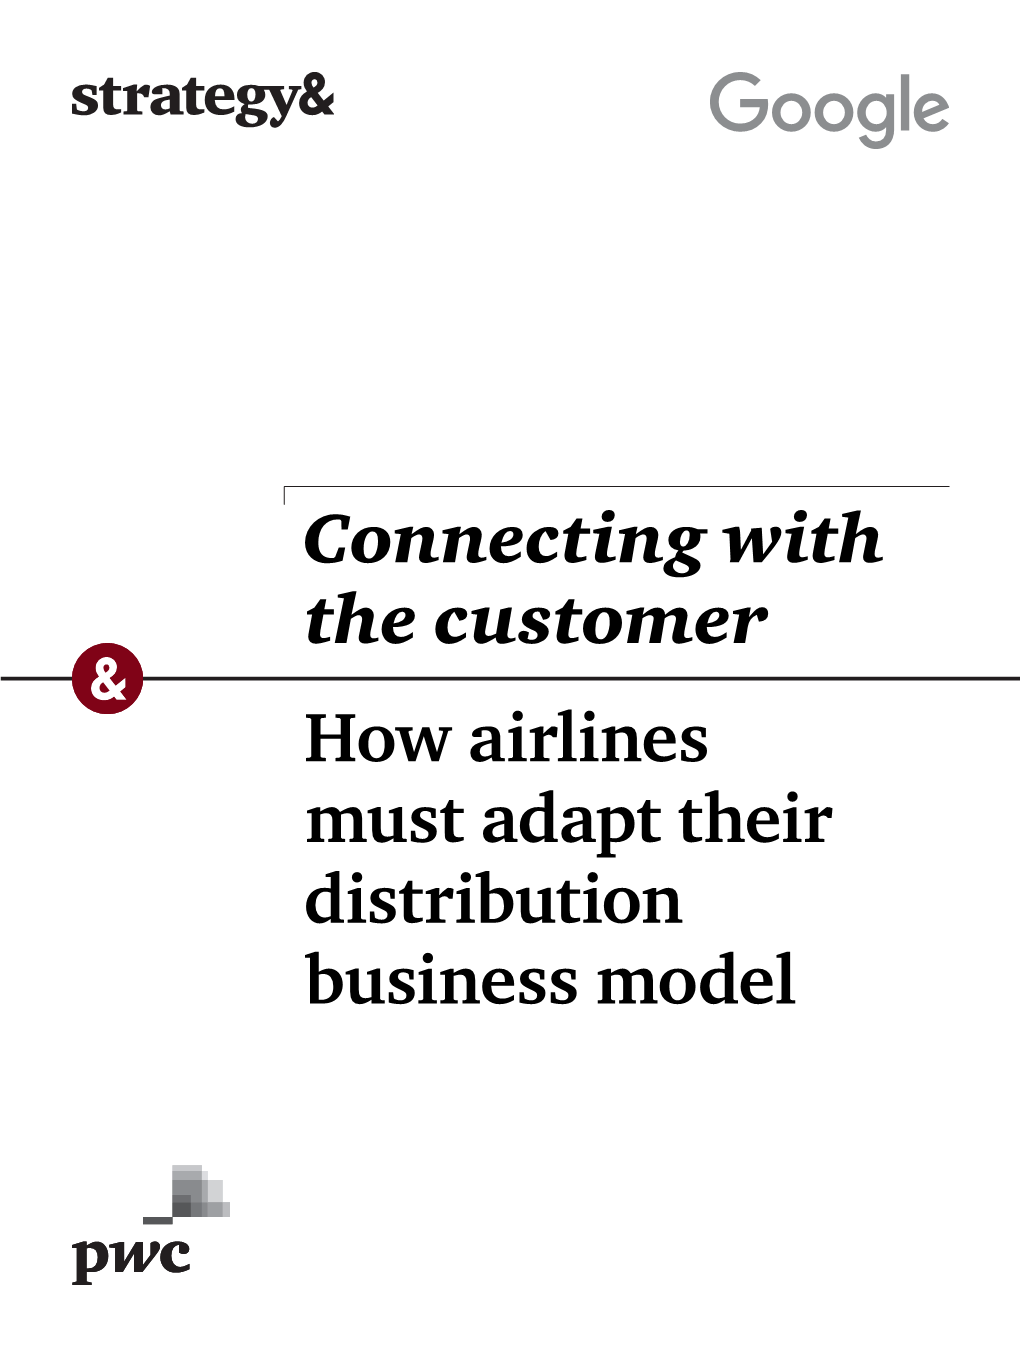 Connecting with the Customer: How Airlines Must Adapt Their